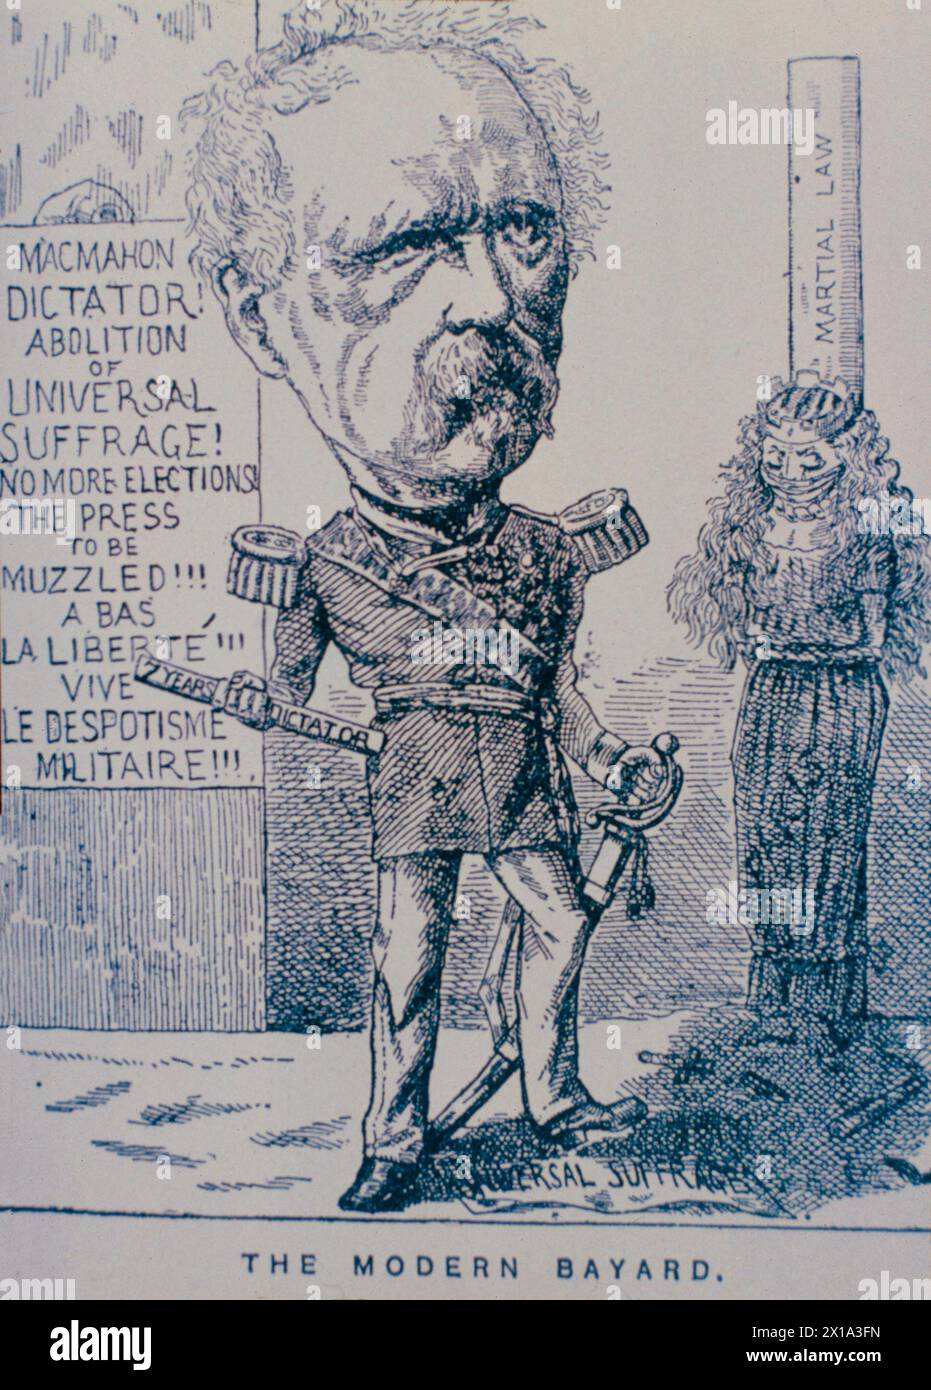 French Marshal Patrice de MacMahon depicted crushing universal suffrage, cartoon from 1877 Stock Photo